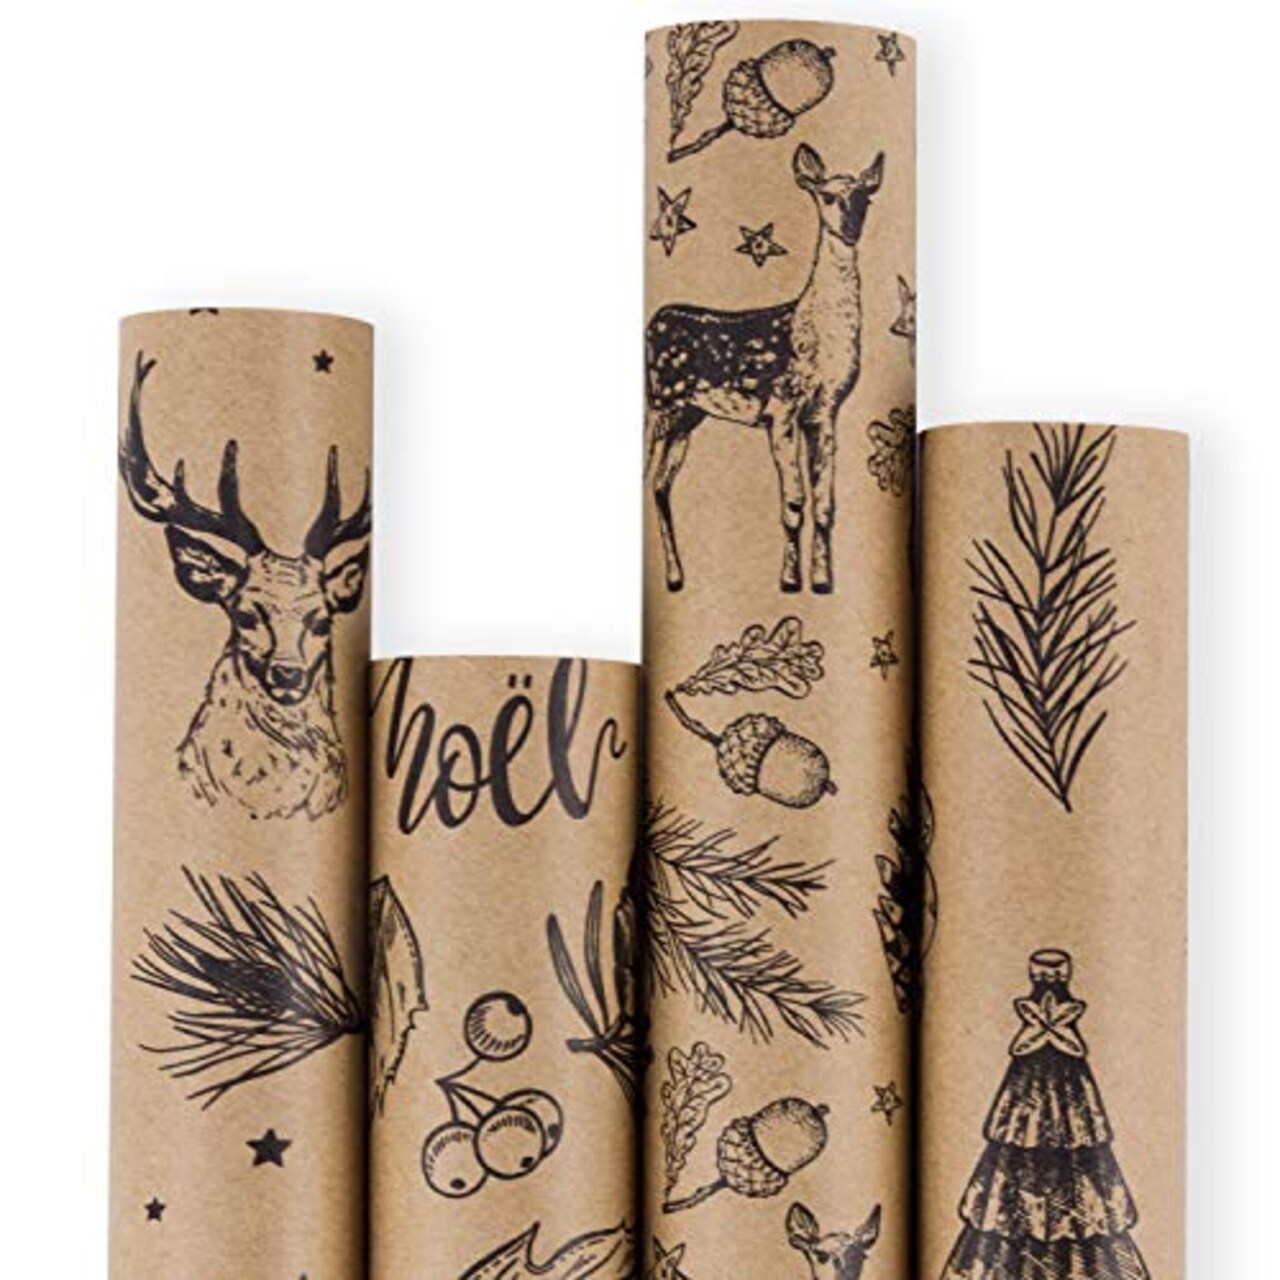 RUSPEPA Christmas Wrapping paper - Brown Kraft Paper with Black Christmas  Elements Print Paper - 4 Roll-30Inch X 10Feet Per Roll